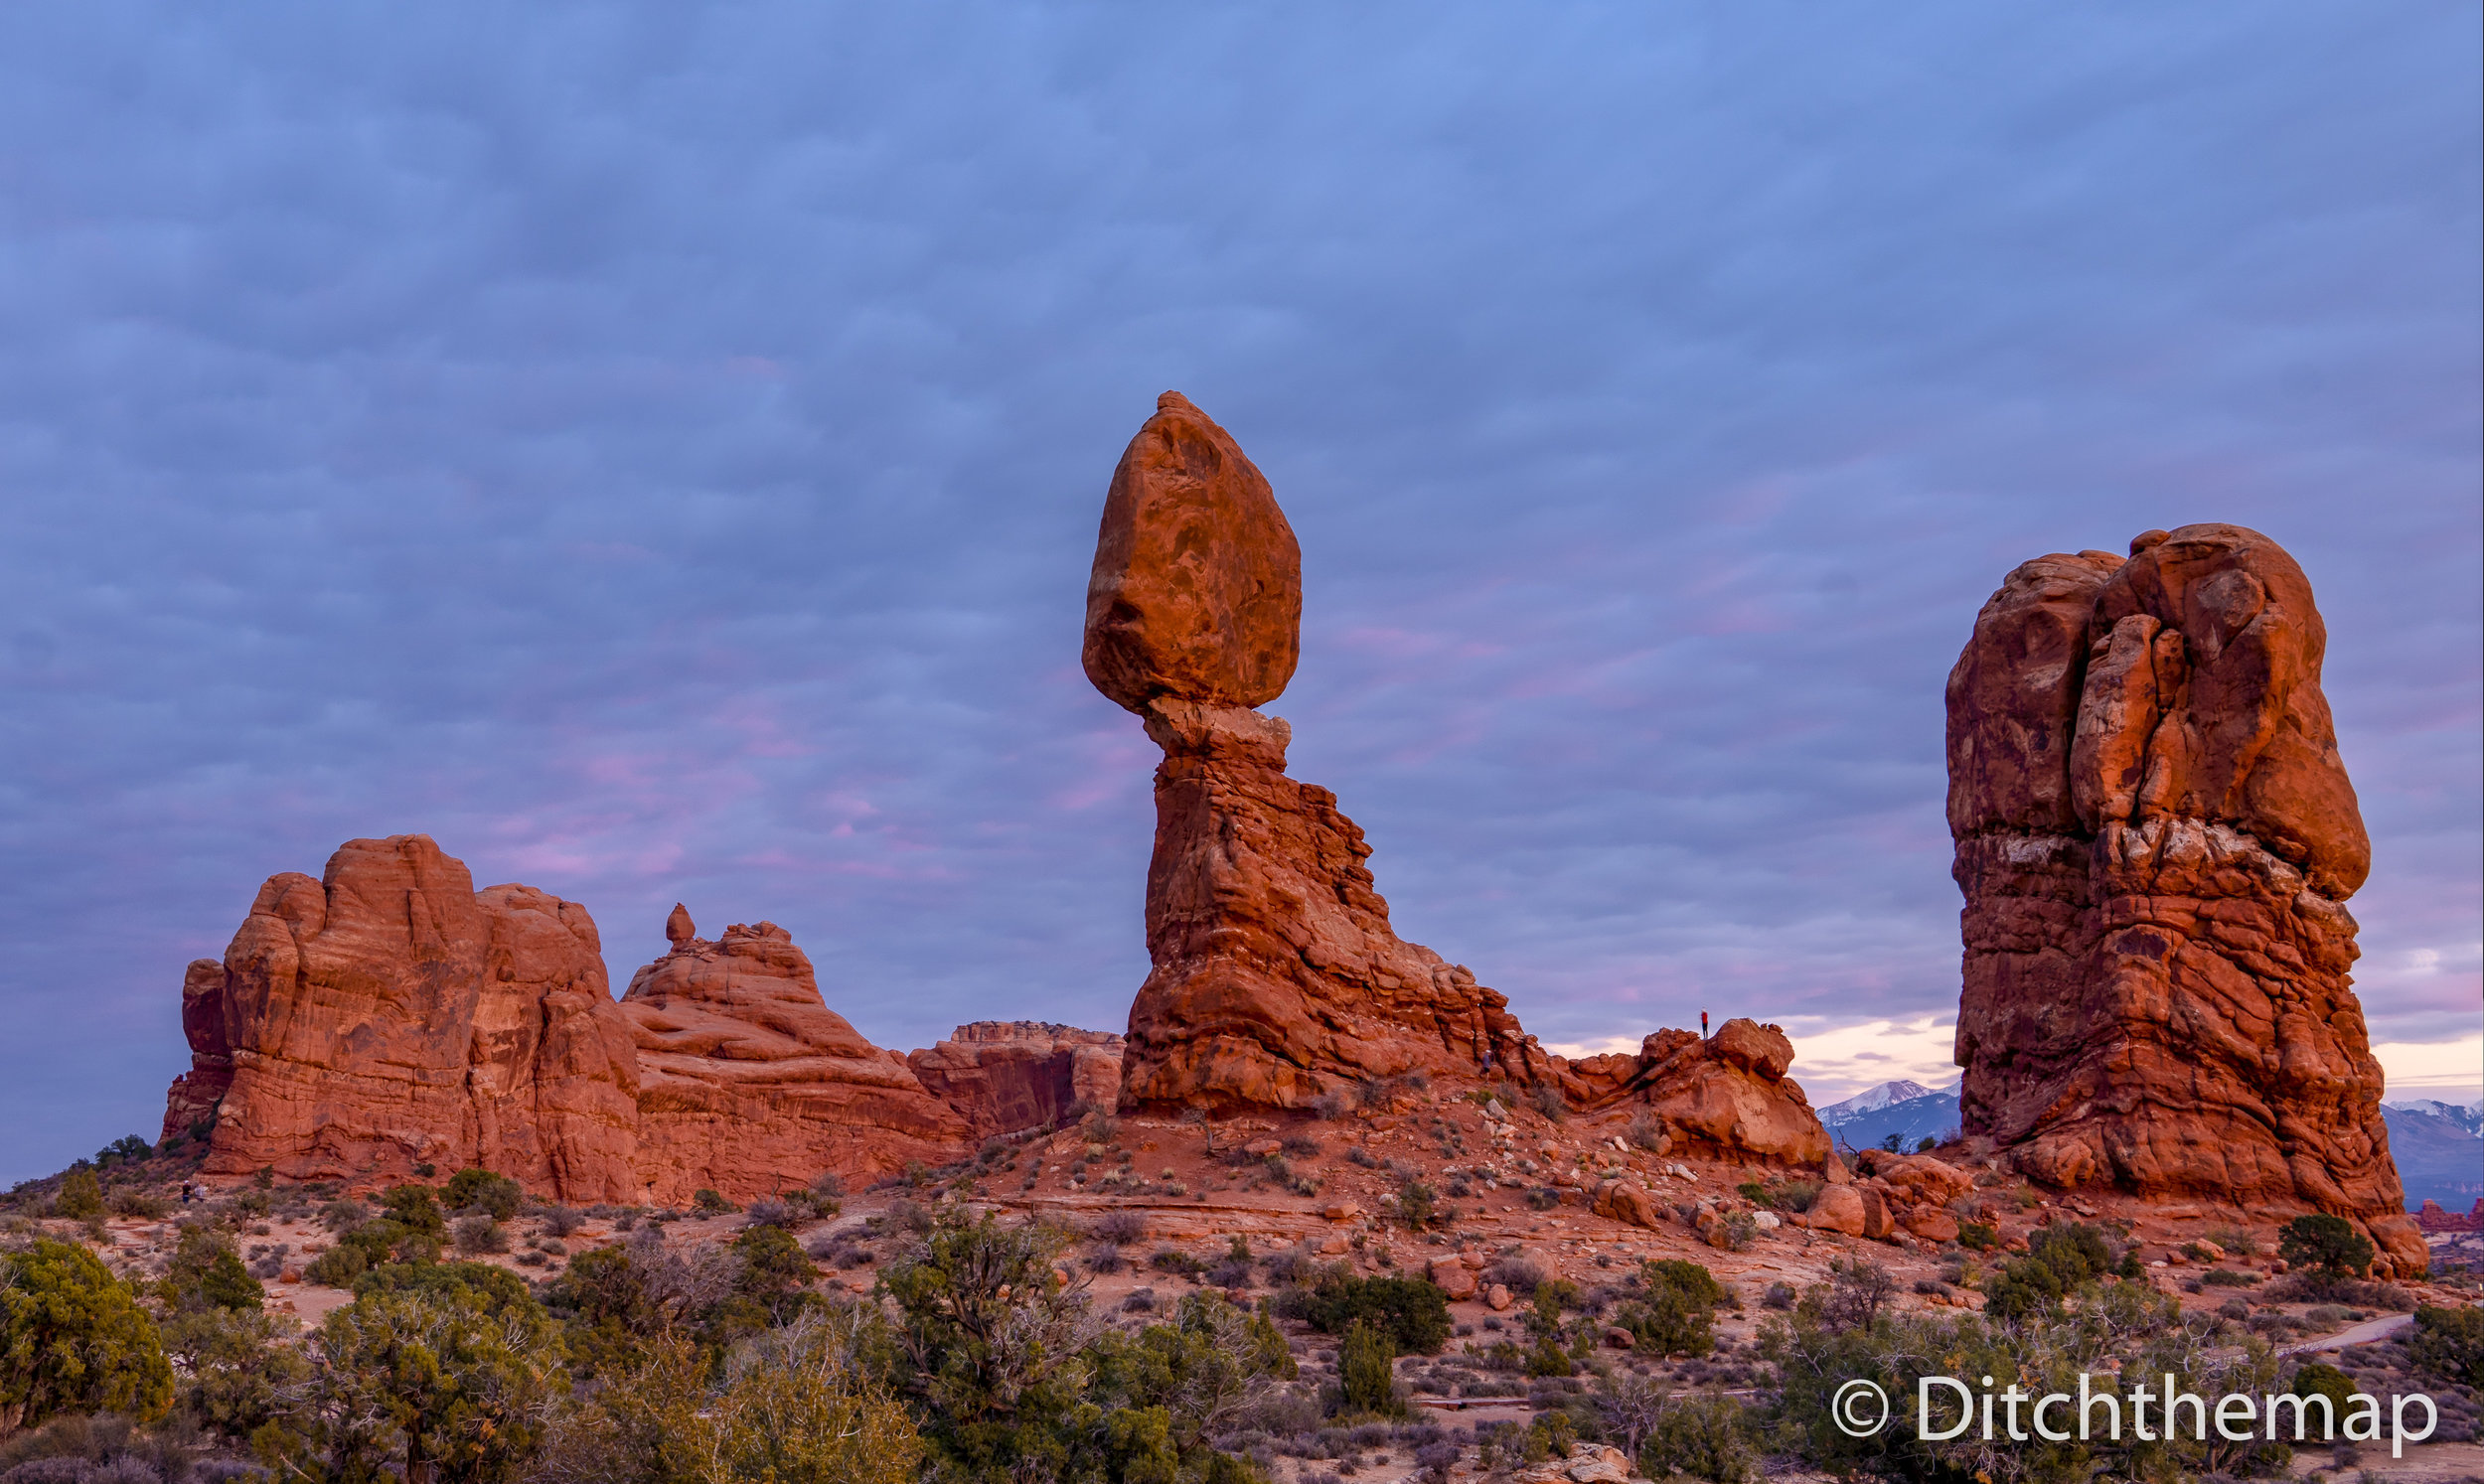 Sunset at Balanced Rock in Arches